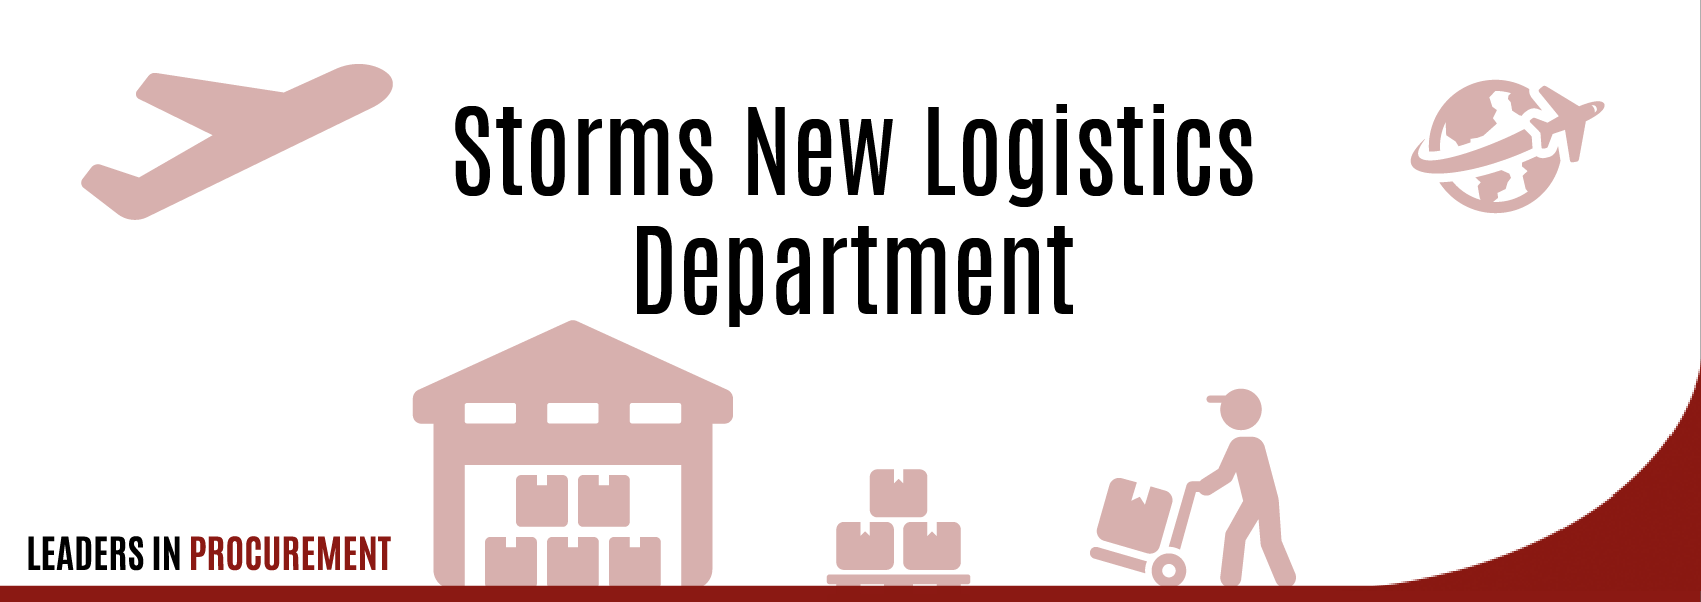 We Are Expanding - Our New Logistics Department!